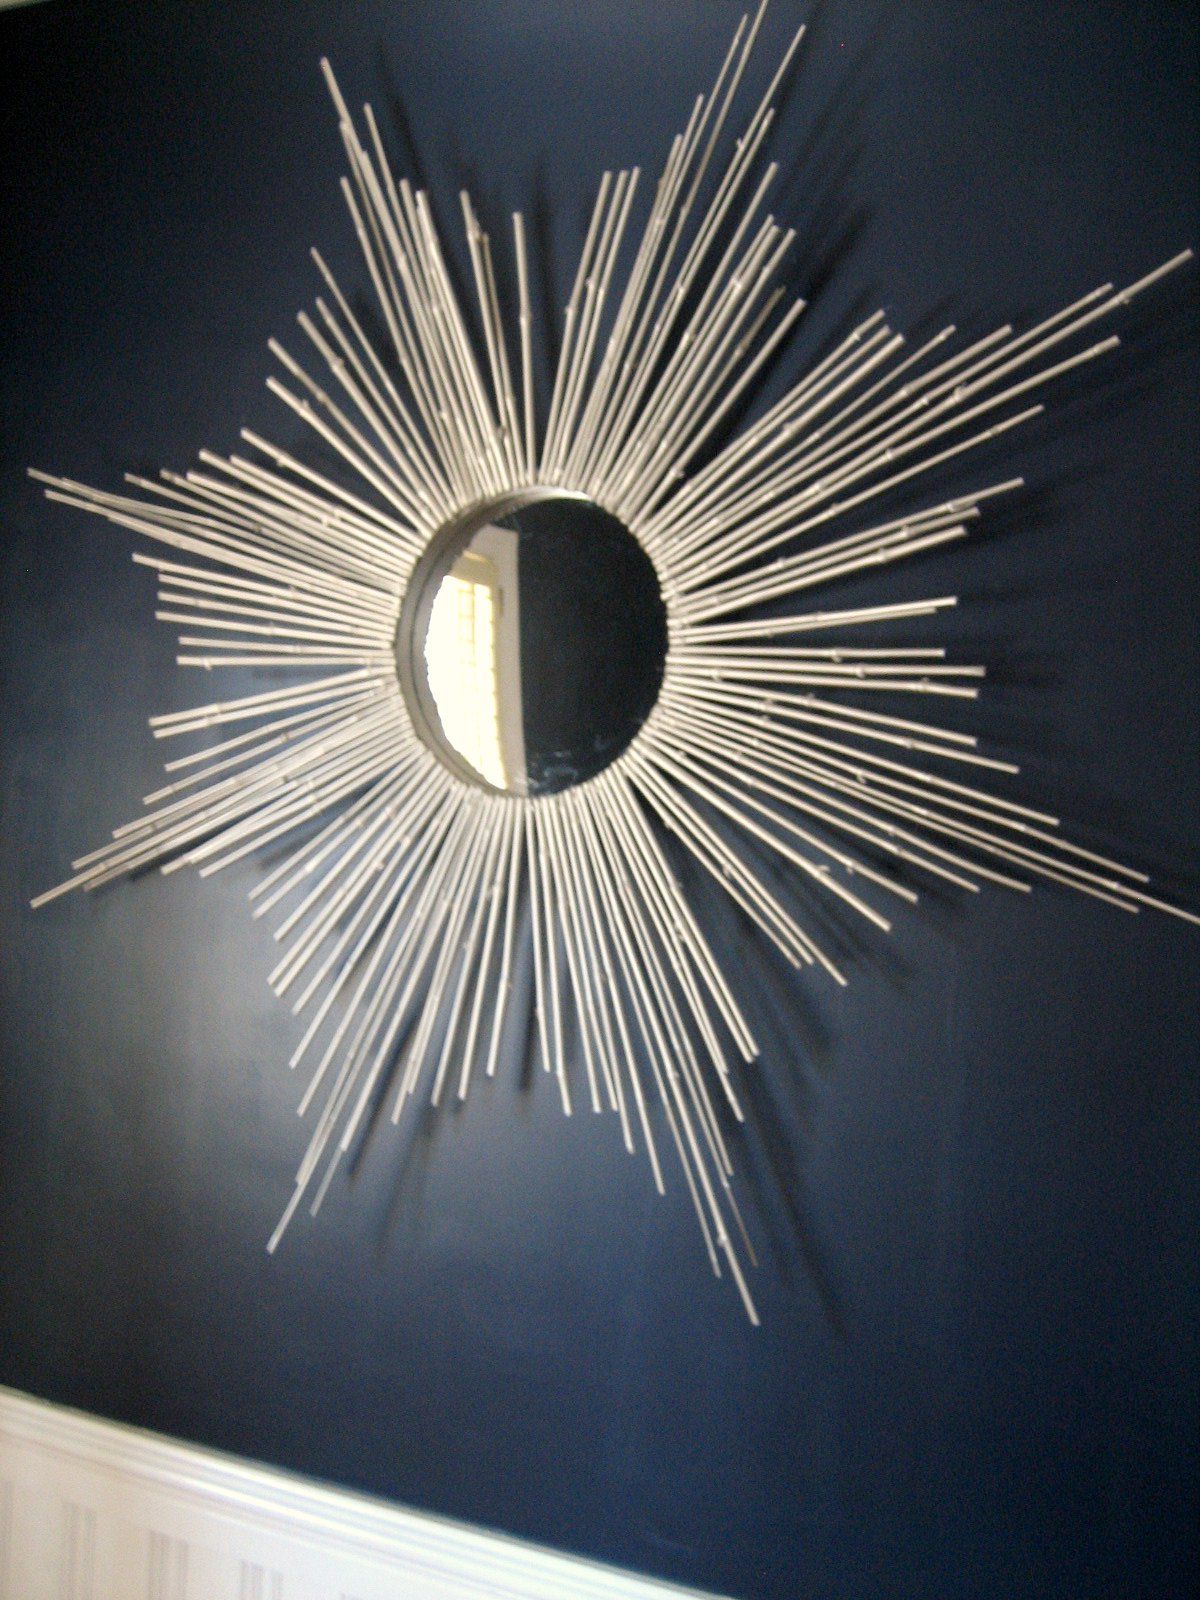 Famous Stick On Wall Mirrors With Regard To Ten June: Diy Bamboo Stick Sunburst Mirror Tutorial (View 19 of 20)